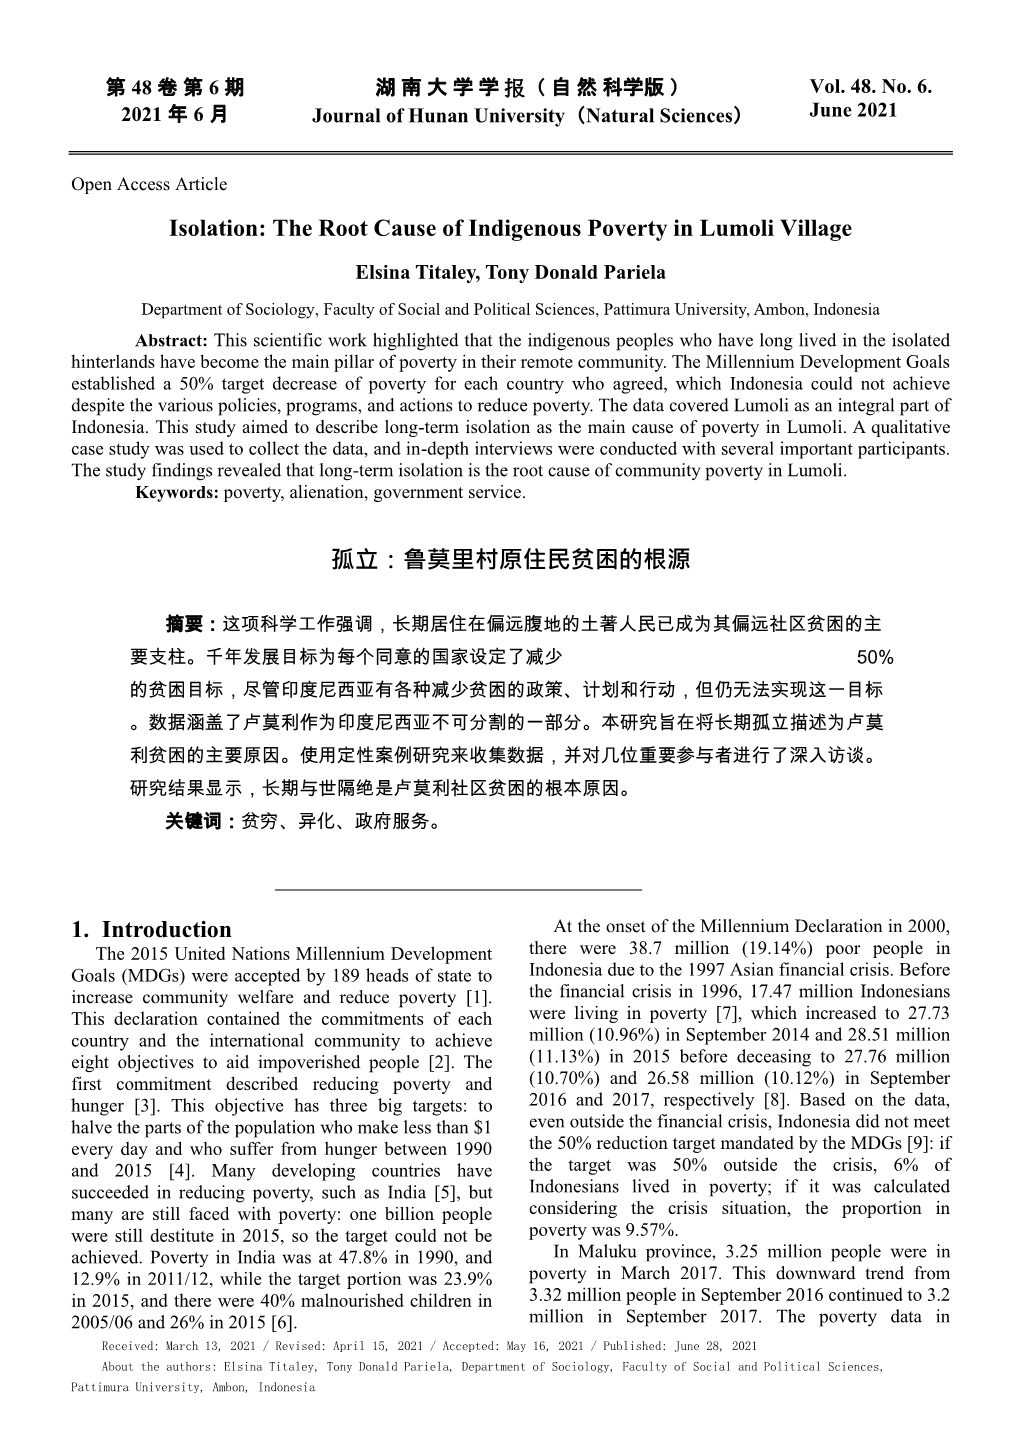 The Root Cause of Indigenous Poverty in Lumoli Village 孤立